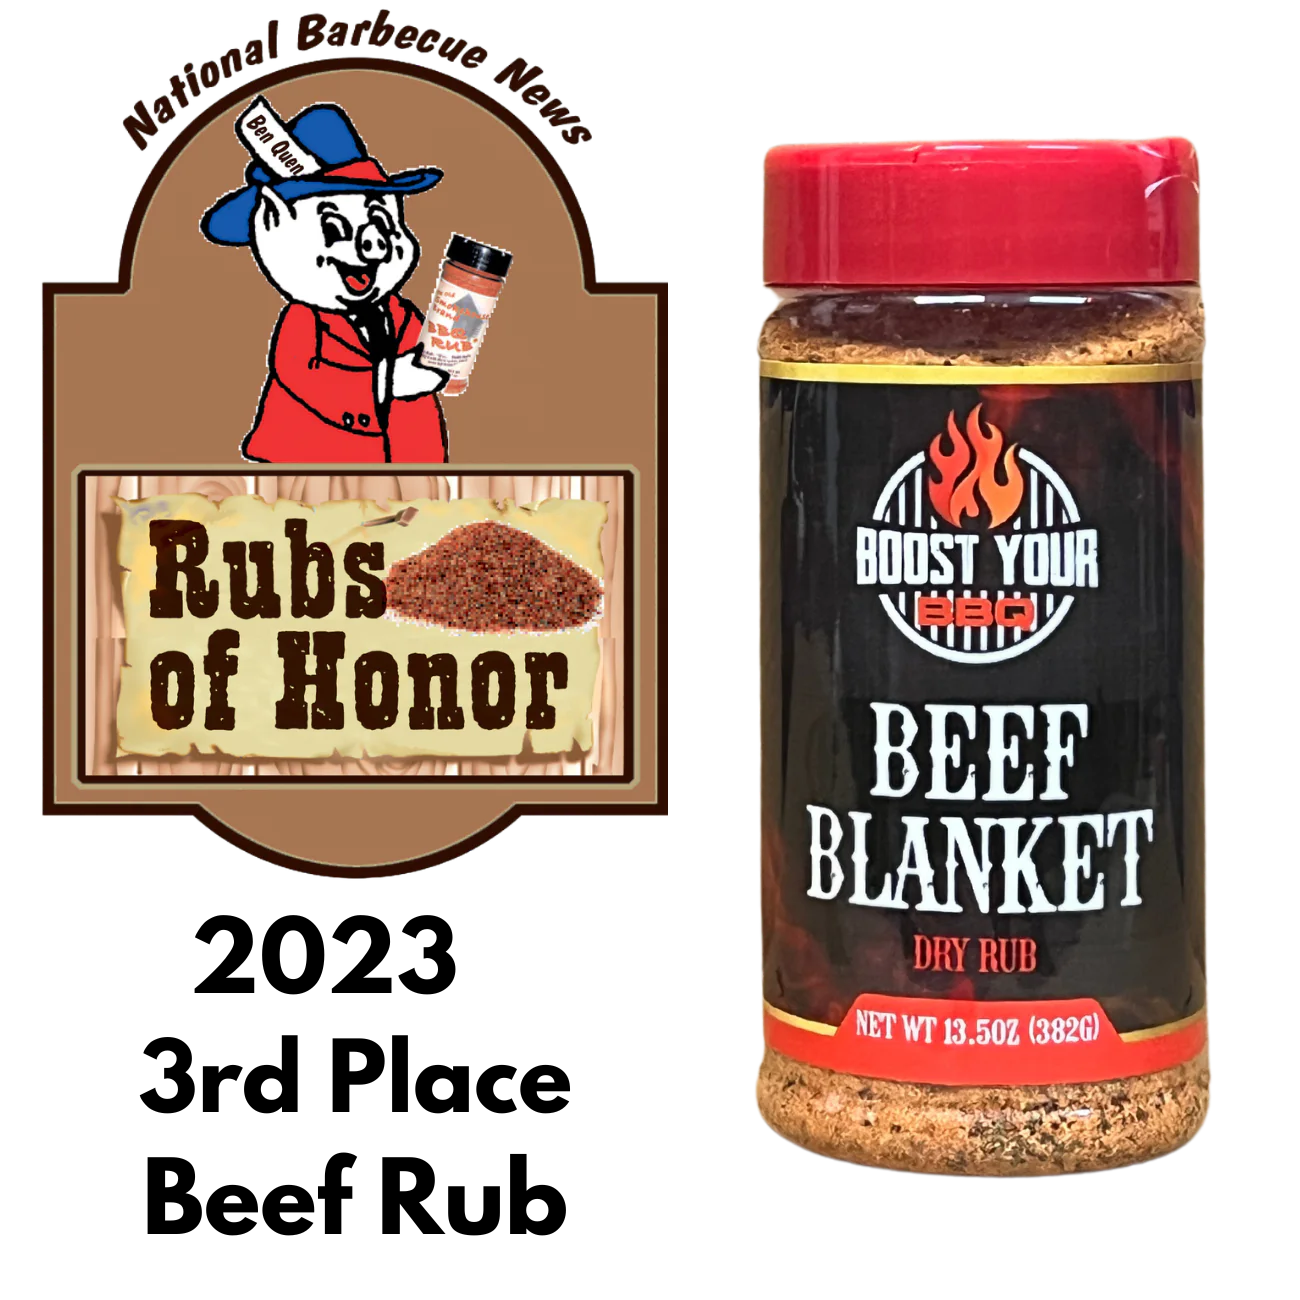 Boost your BBQ – Beef Blanket